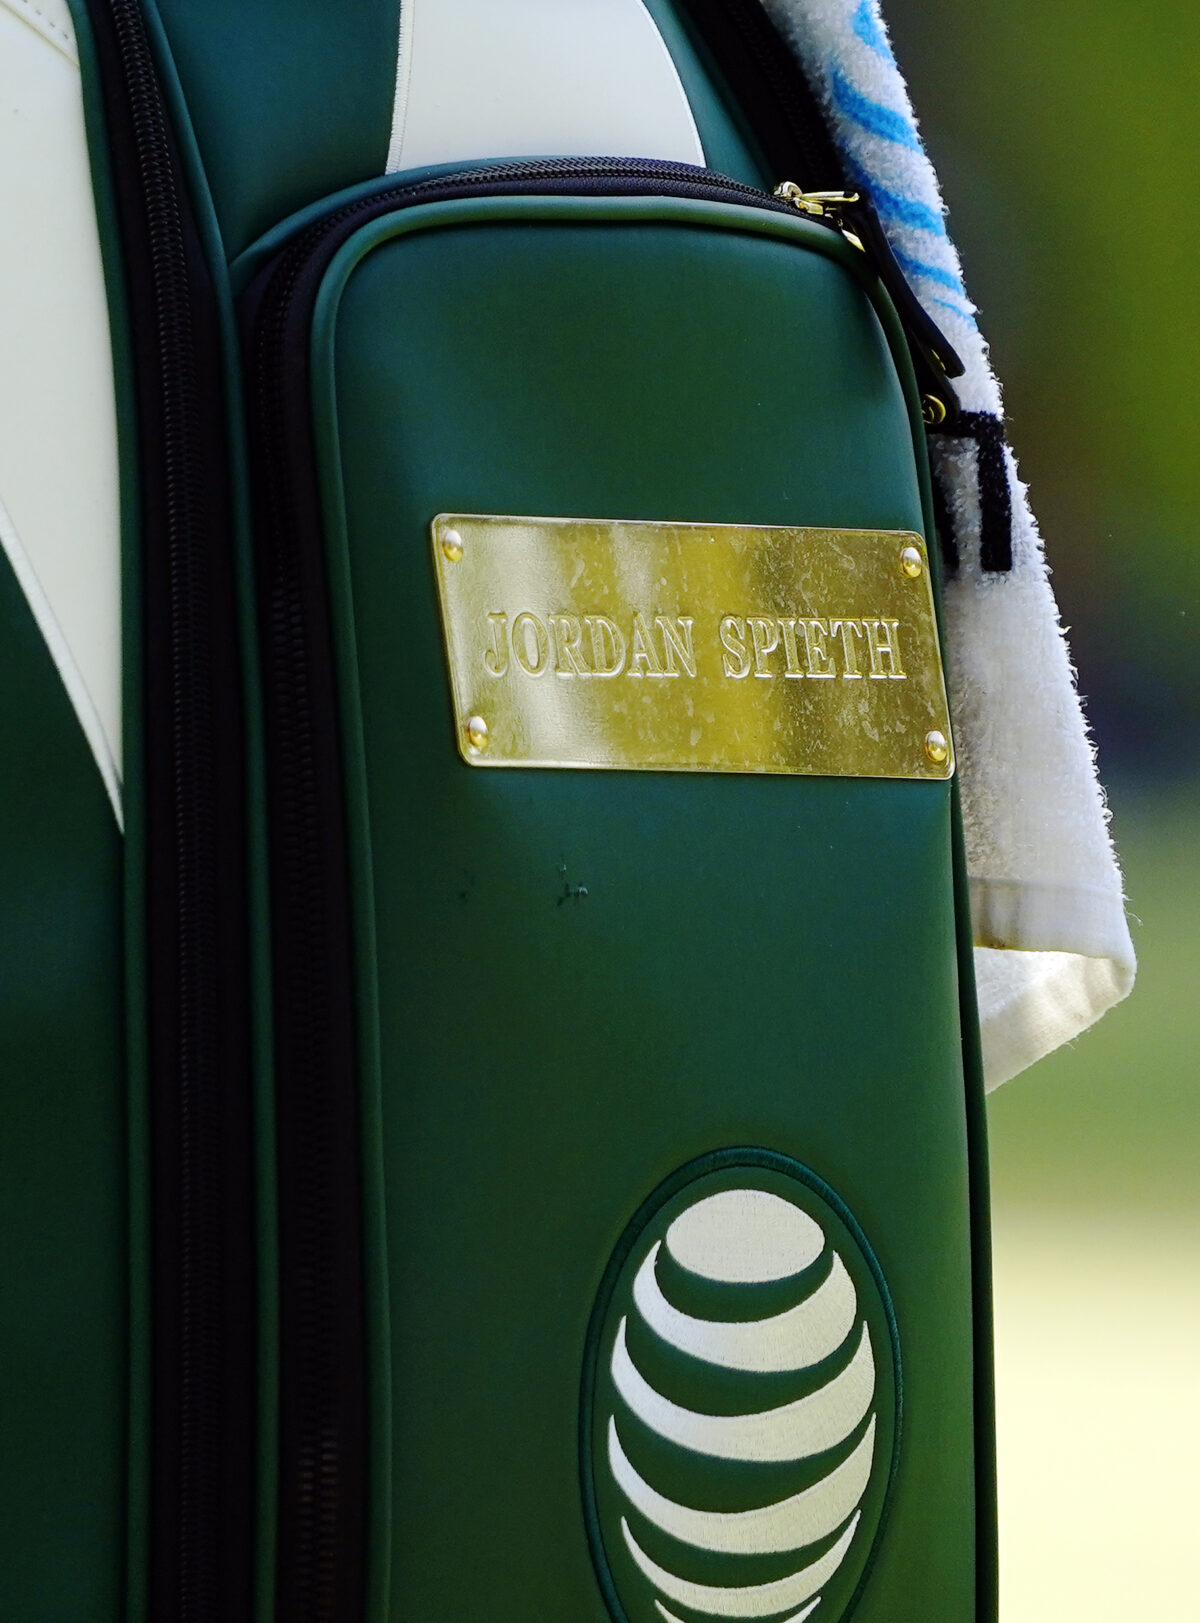 Jordan Spieth’s golf bag at 2024 Masters has special gold plate